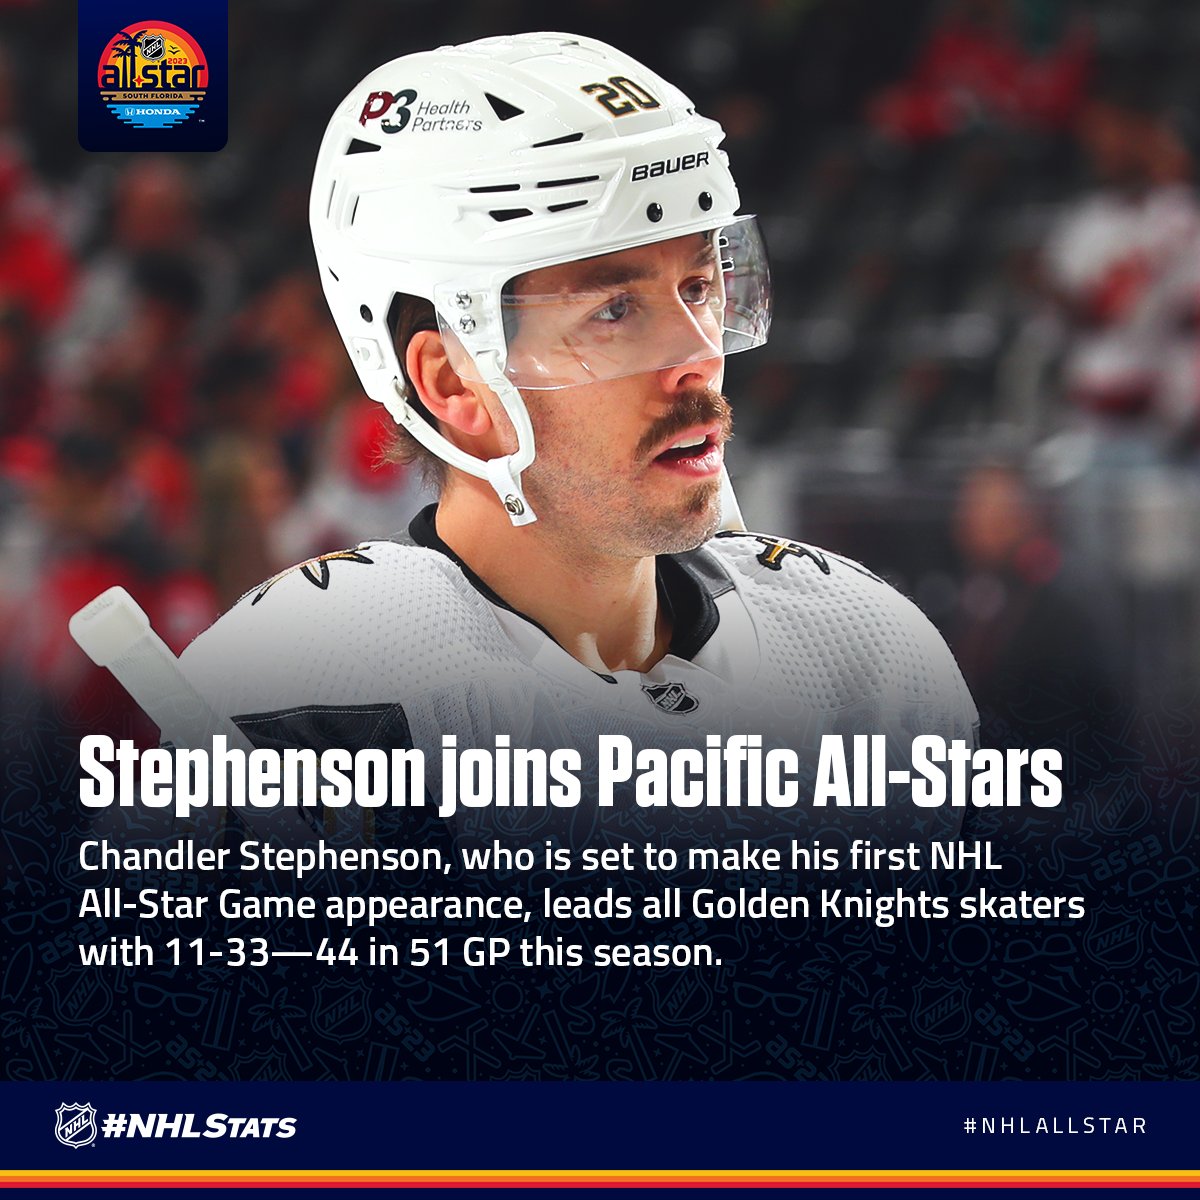 NHL All-Star Game: Matty Beniers out, Chandler Stephenson in